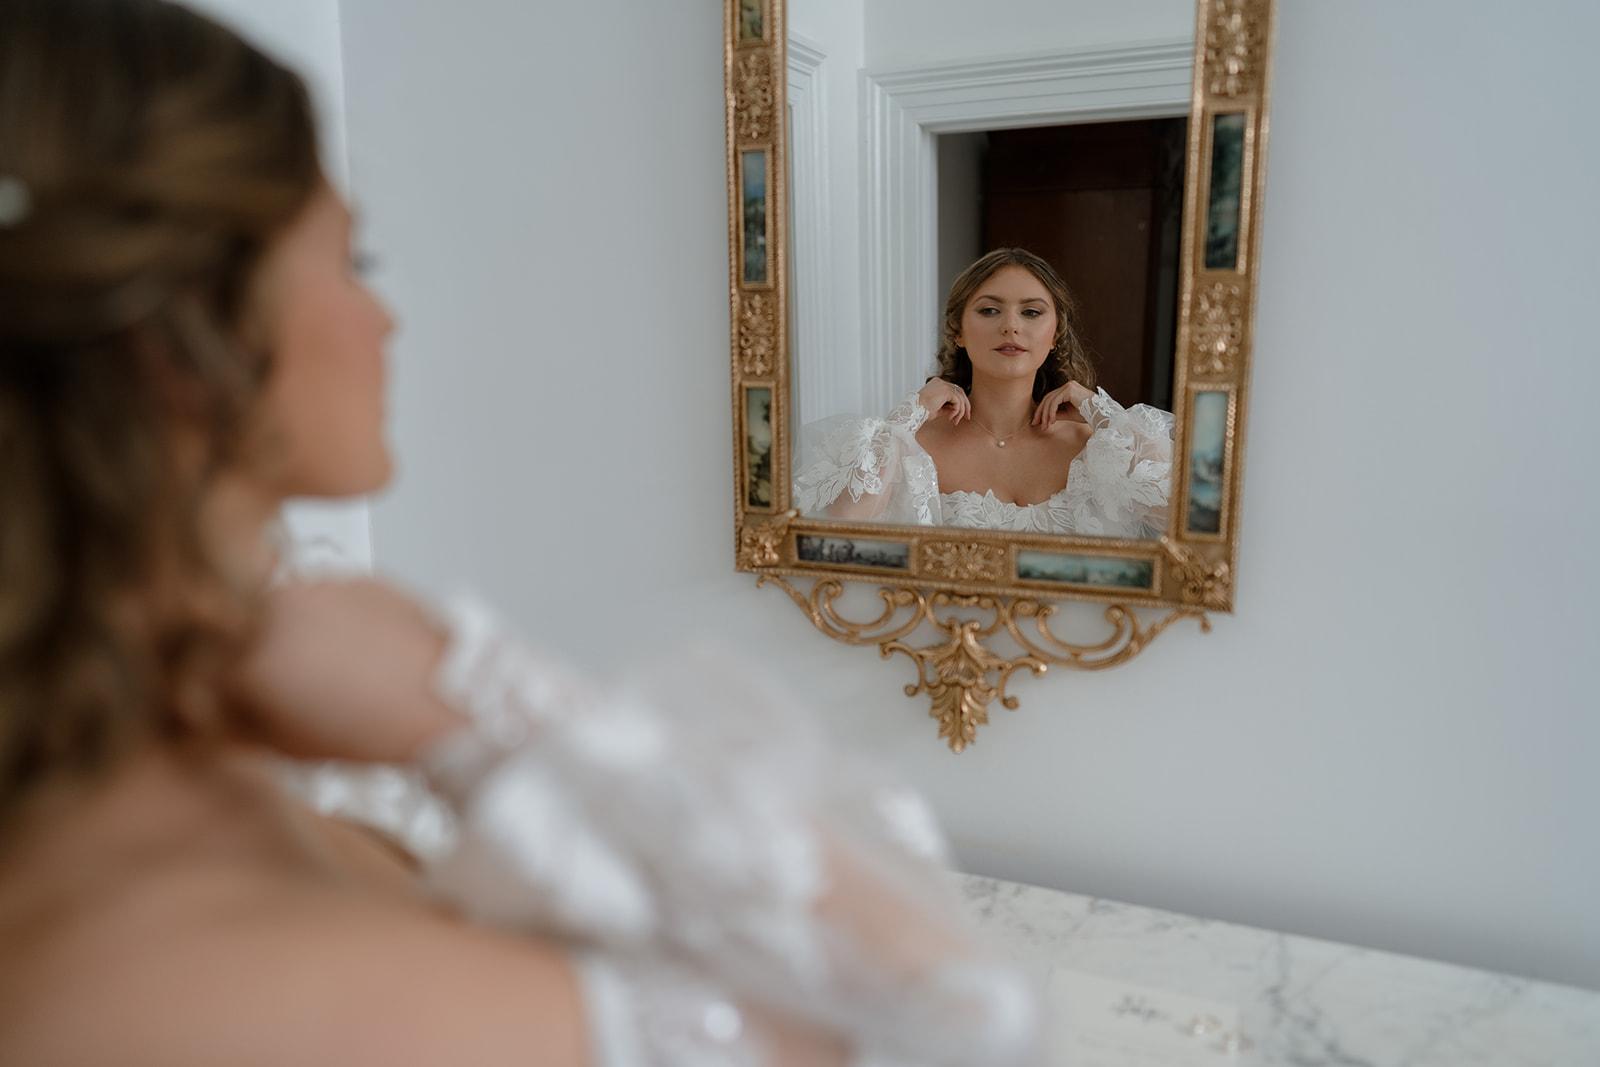 Wedding preparation: Bride adorns herself with a necklace while gazing into the mirror.